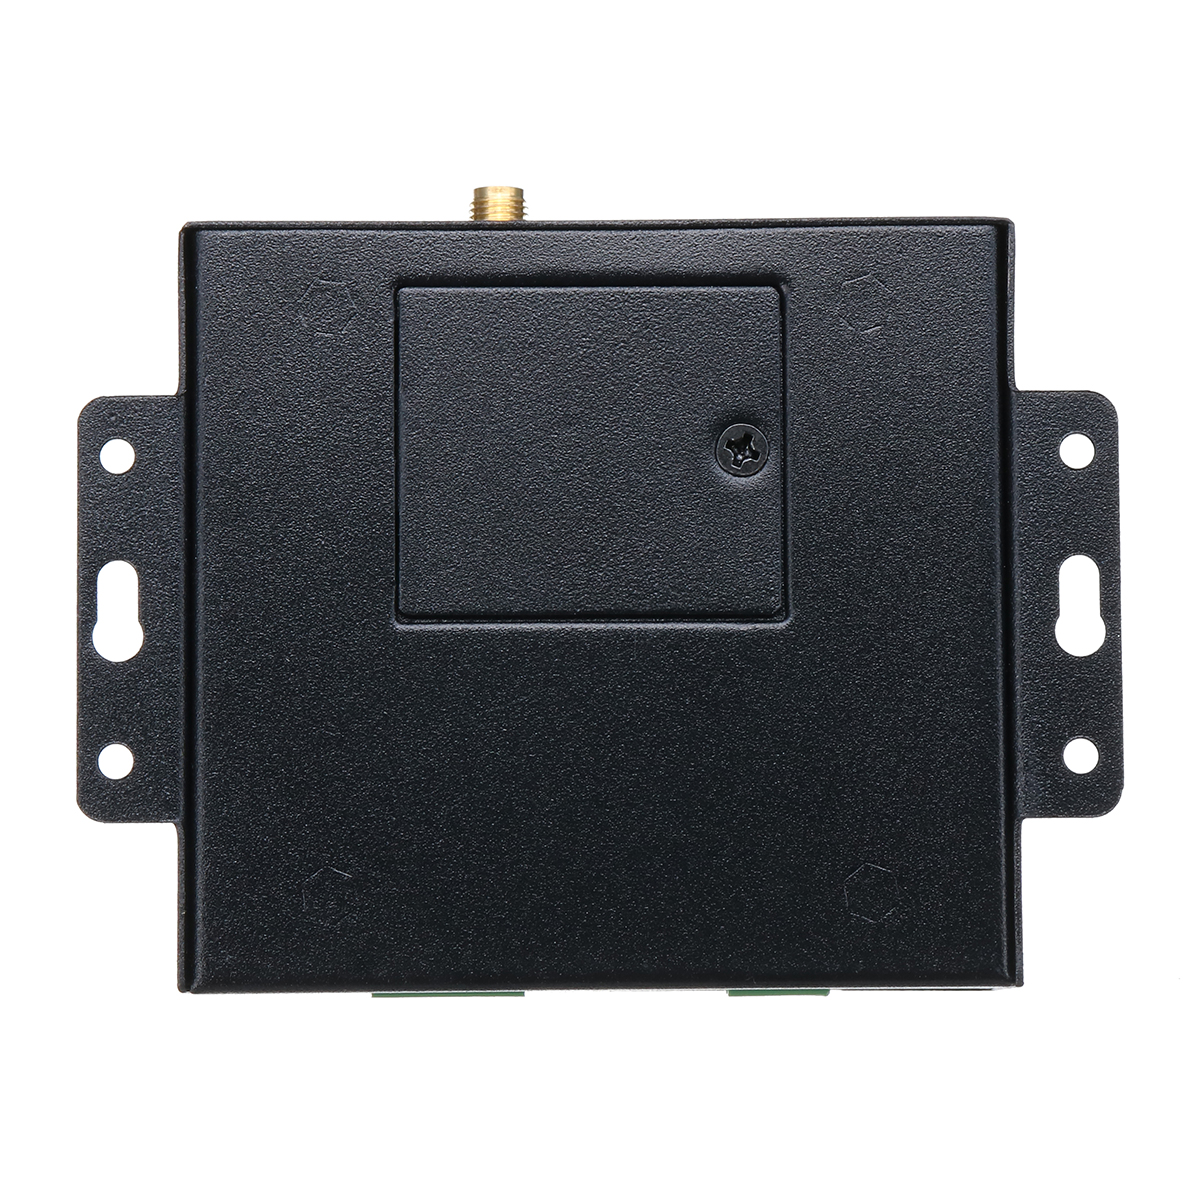 GSM-Gate-Opener-Relay-Switch-Phone-Wireless-Remote-Control-Door-Access-85090018001900MHz-1387509-5